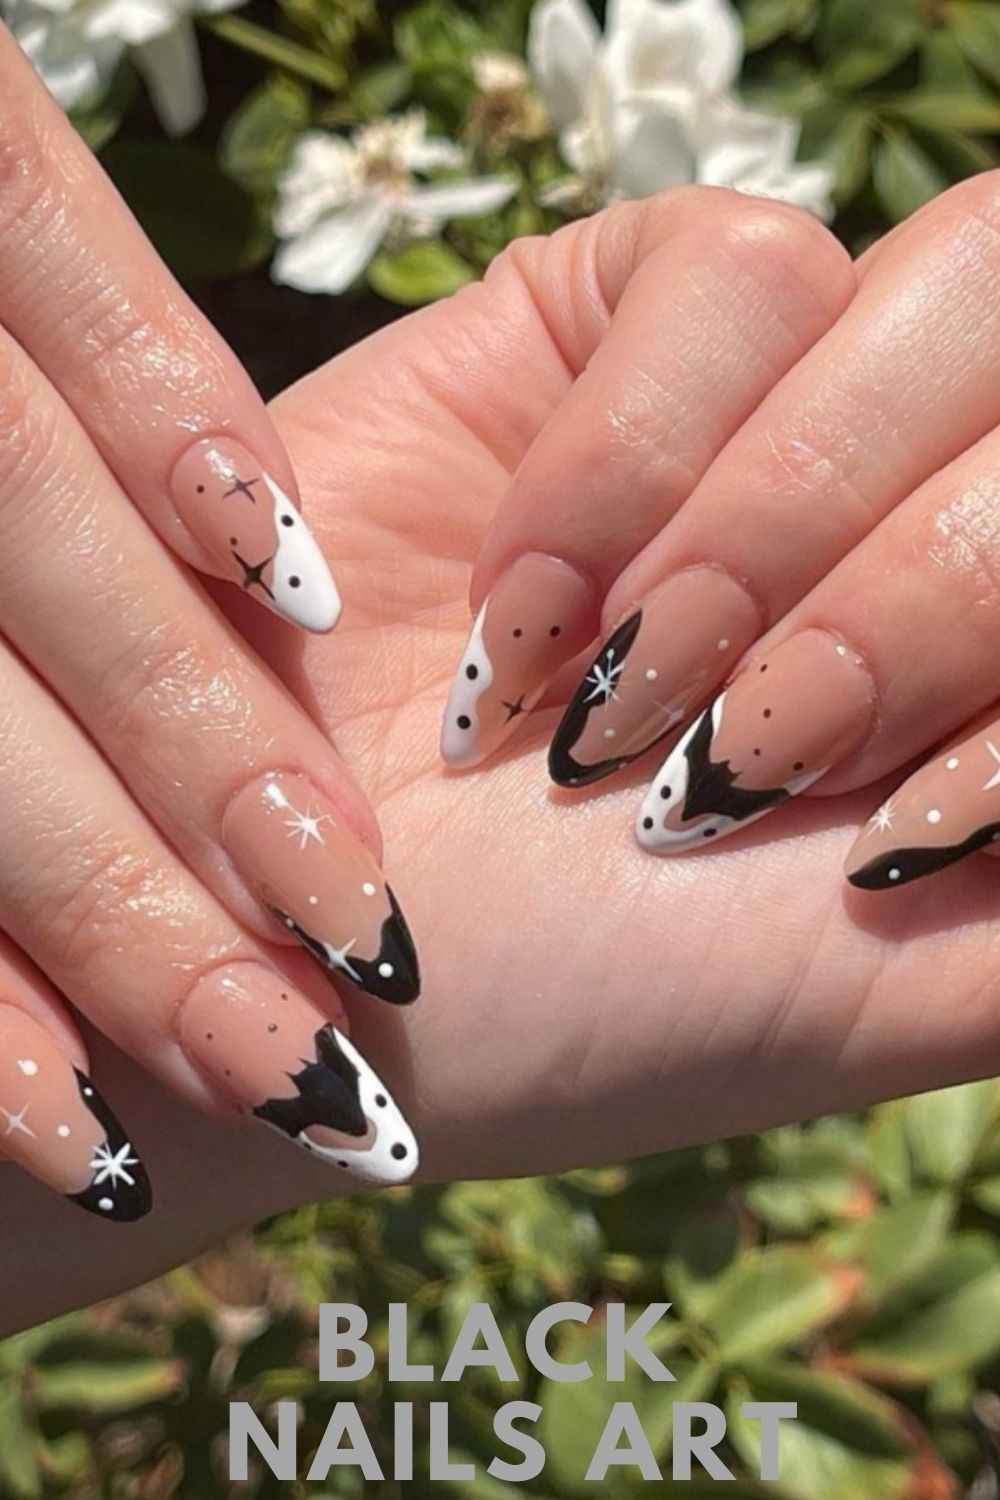 White and black tip almond nails ideas